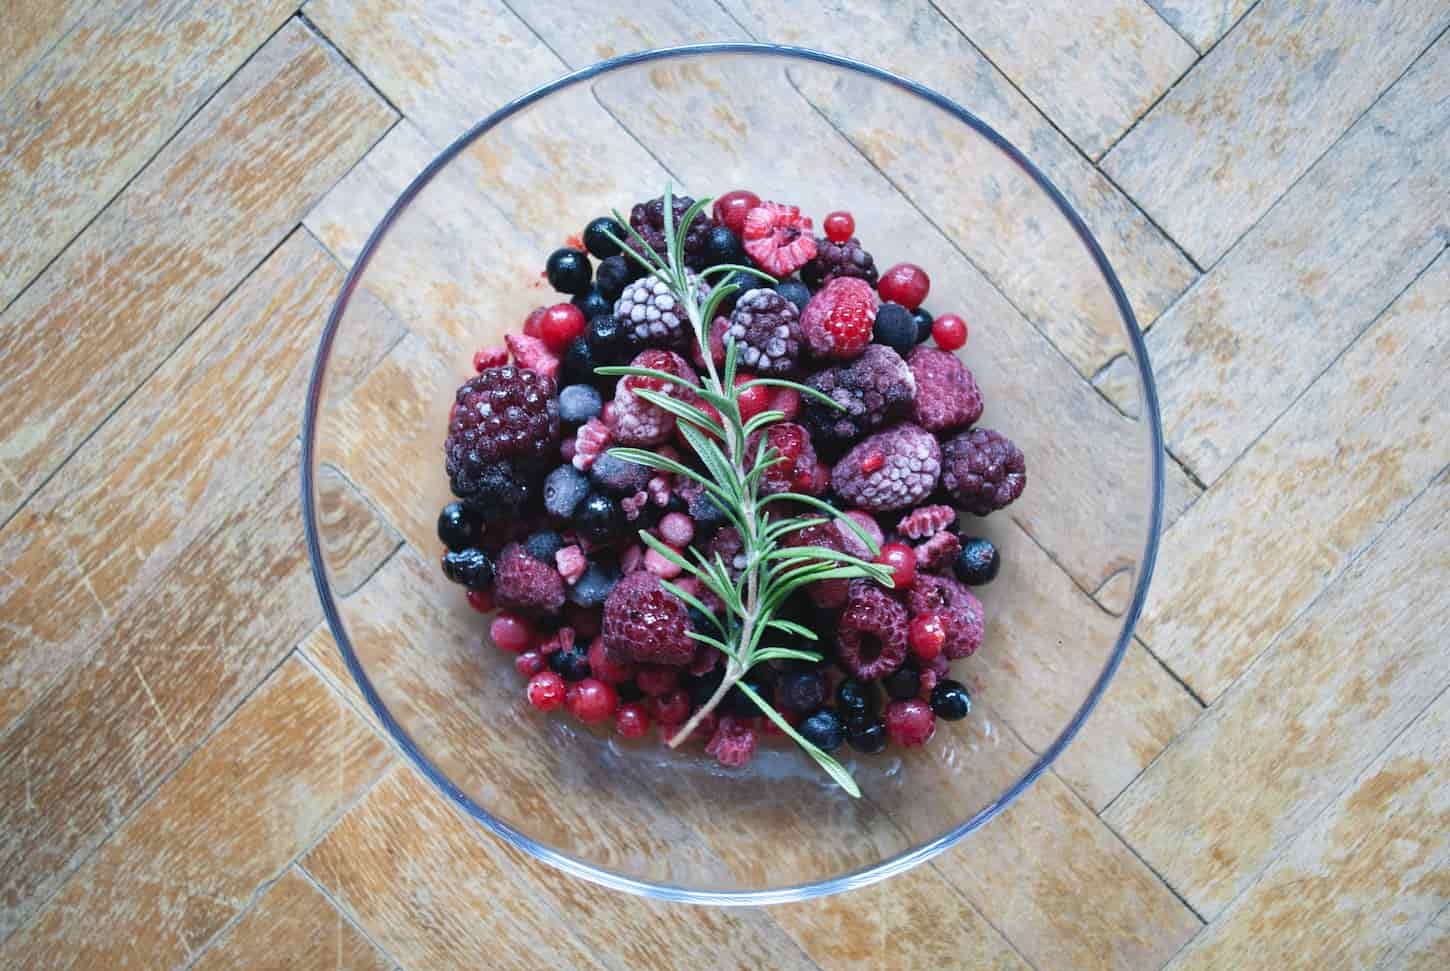 How to Freeze Berries the Right Way